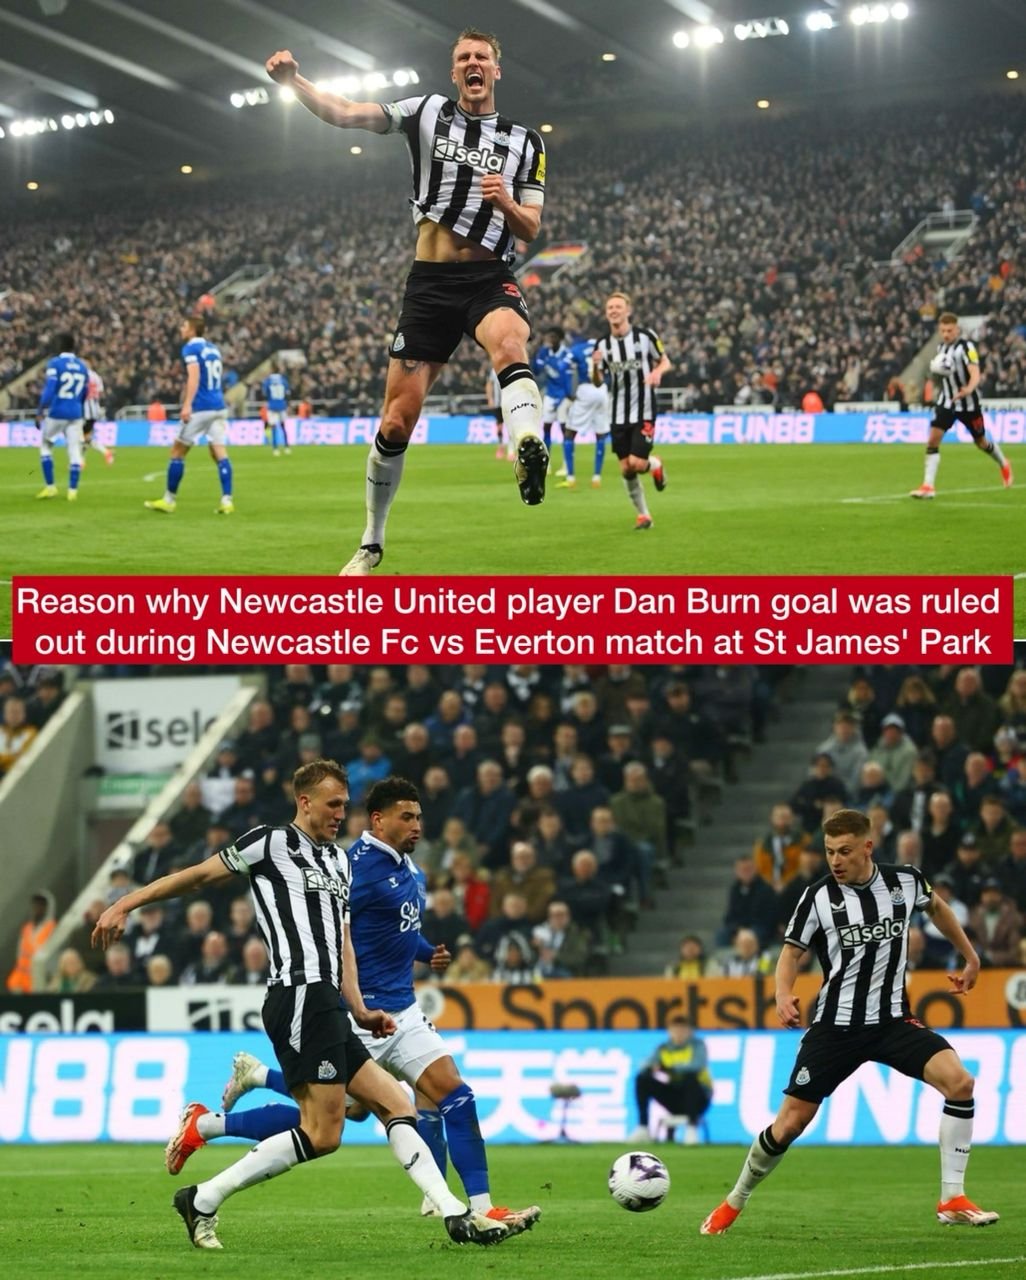 Reason why Newcastle United player Dan Burn goal was ruled out during Newcastle Fc vs Everton match at St James' Park